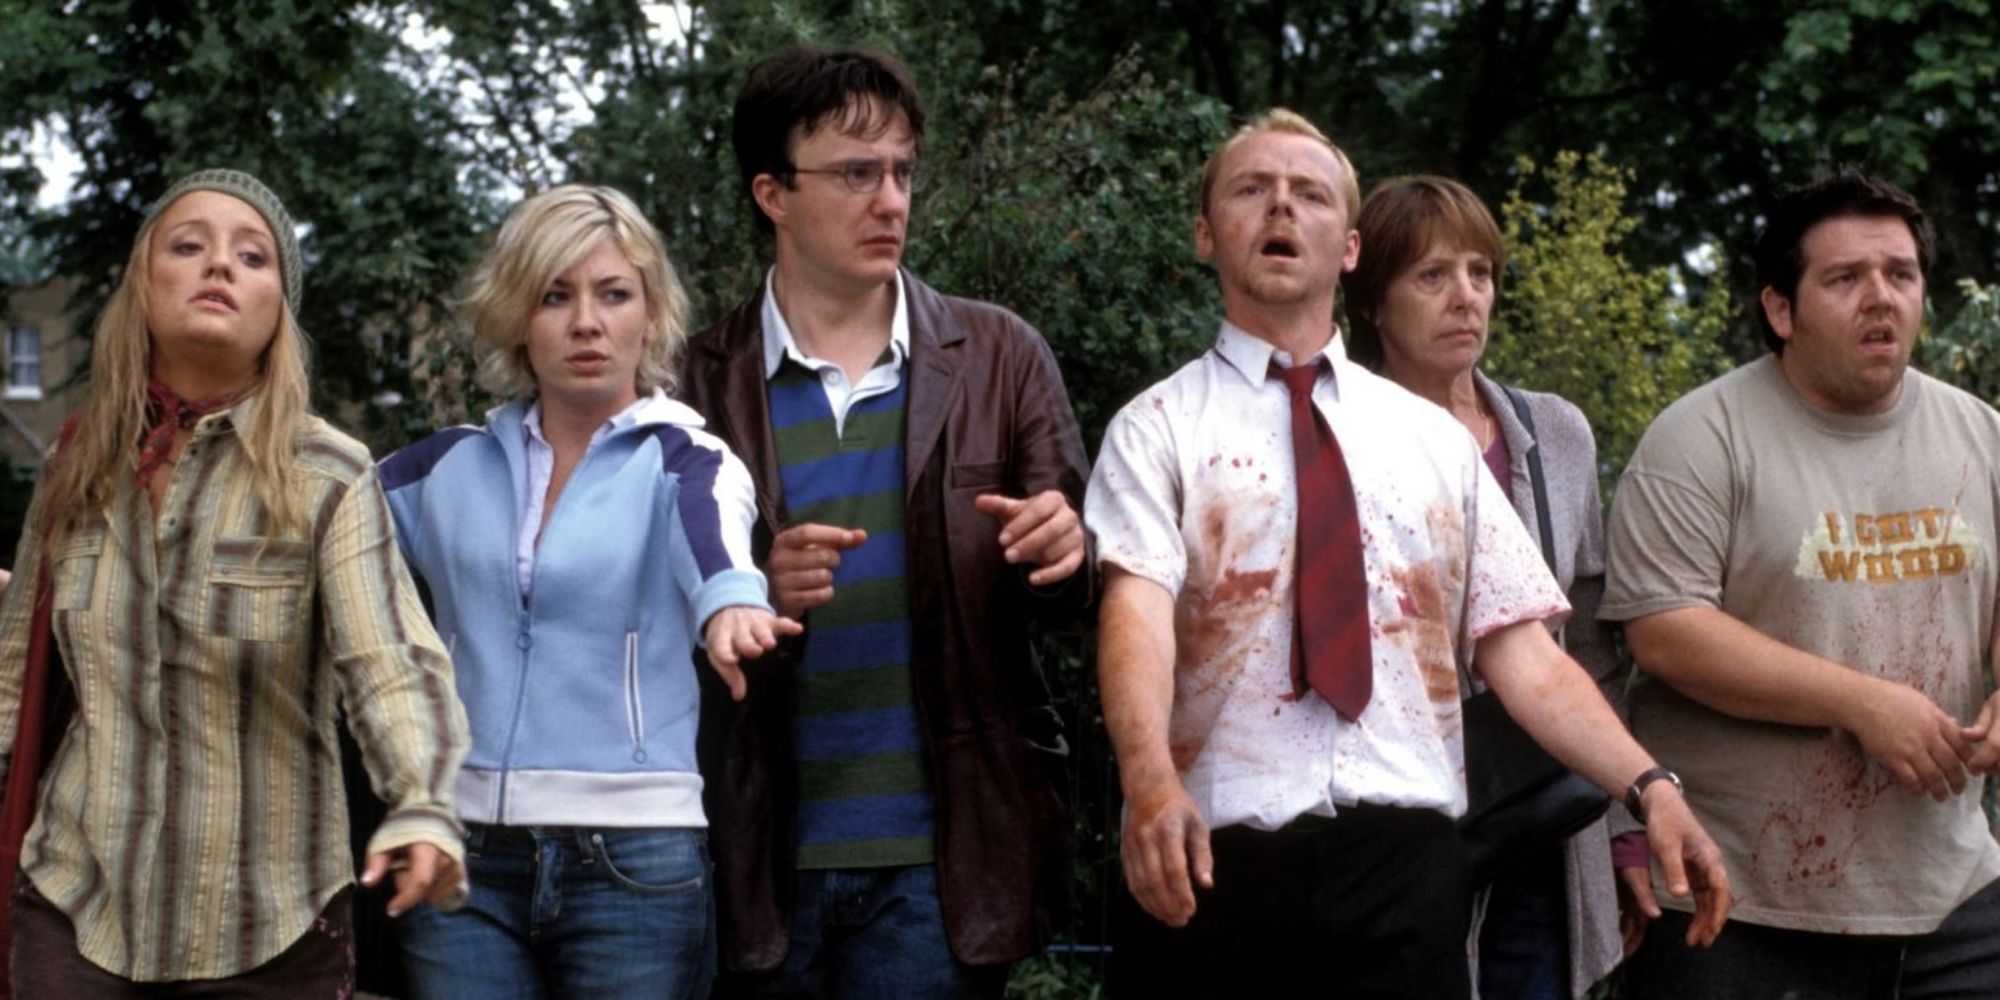 The main characters from Shaun of the Dead